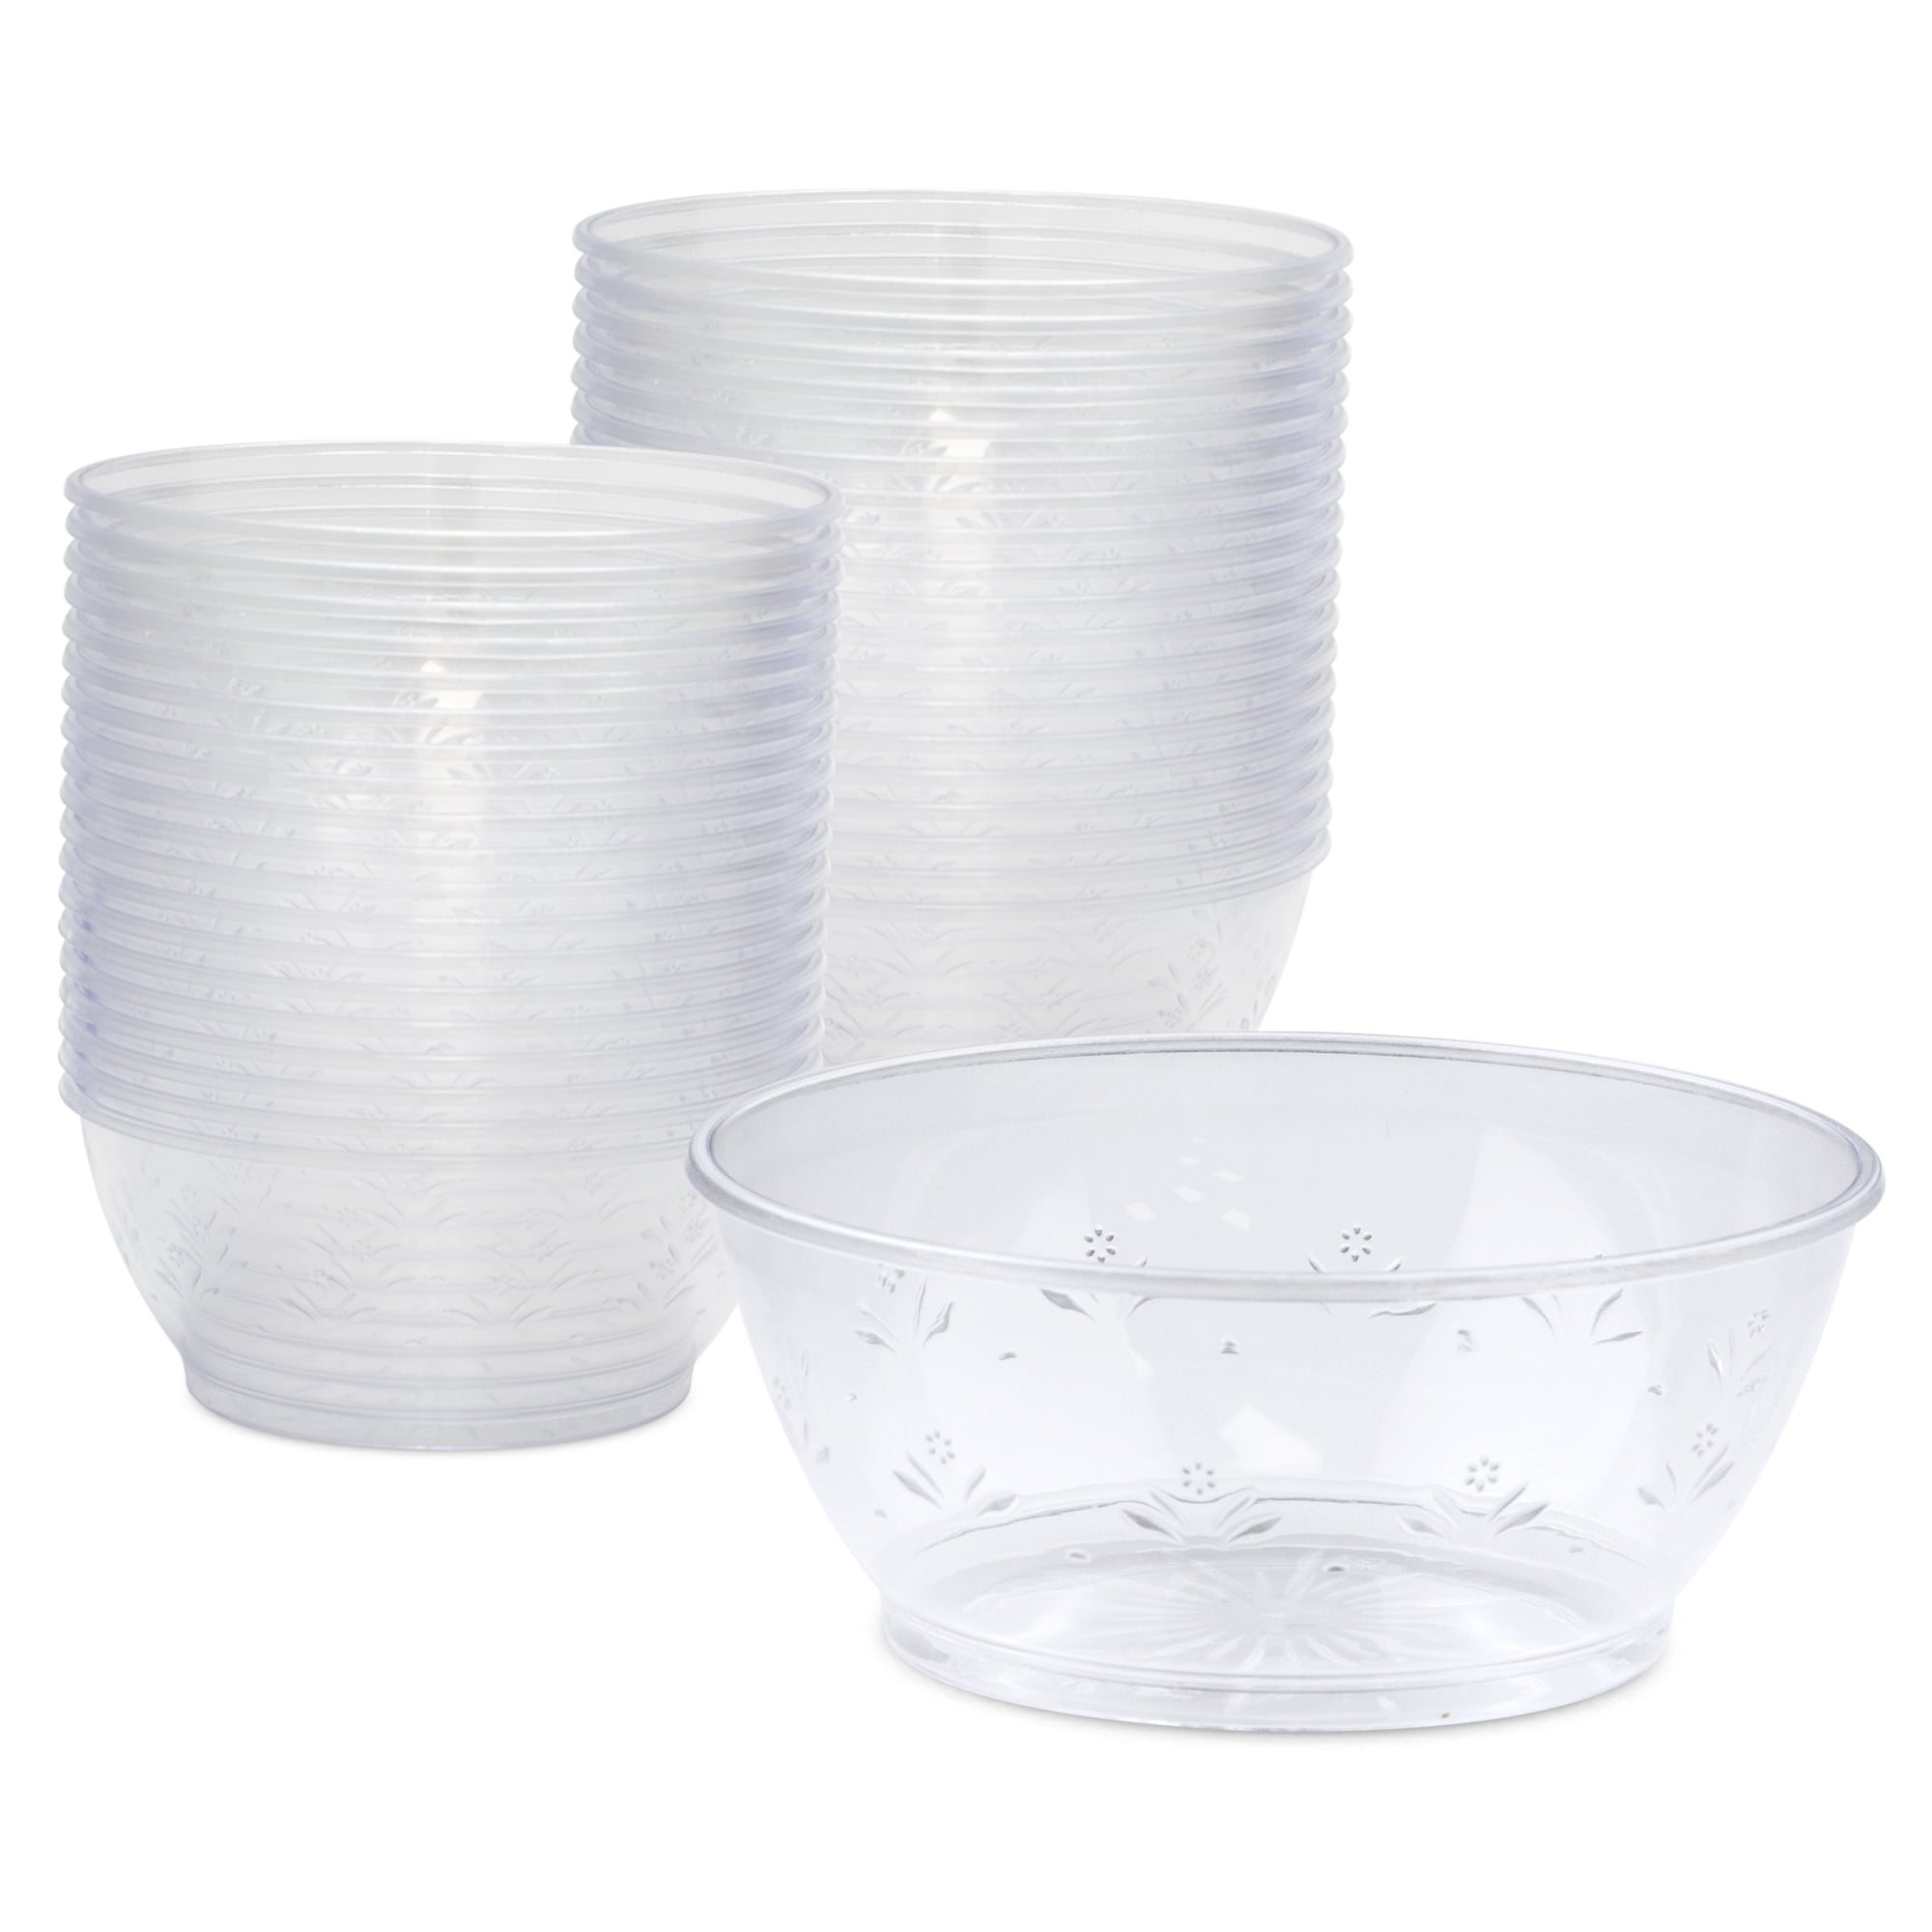 [60 Pack] Clear Plastic Bowls - 6 oz Hard Plastic Ice Cream Cups,  Disposable Soup Bowl, Small Serving Bowl for Sundae, Dessert, Sauce, Salad,  Snacks